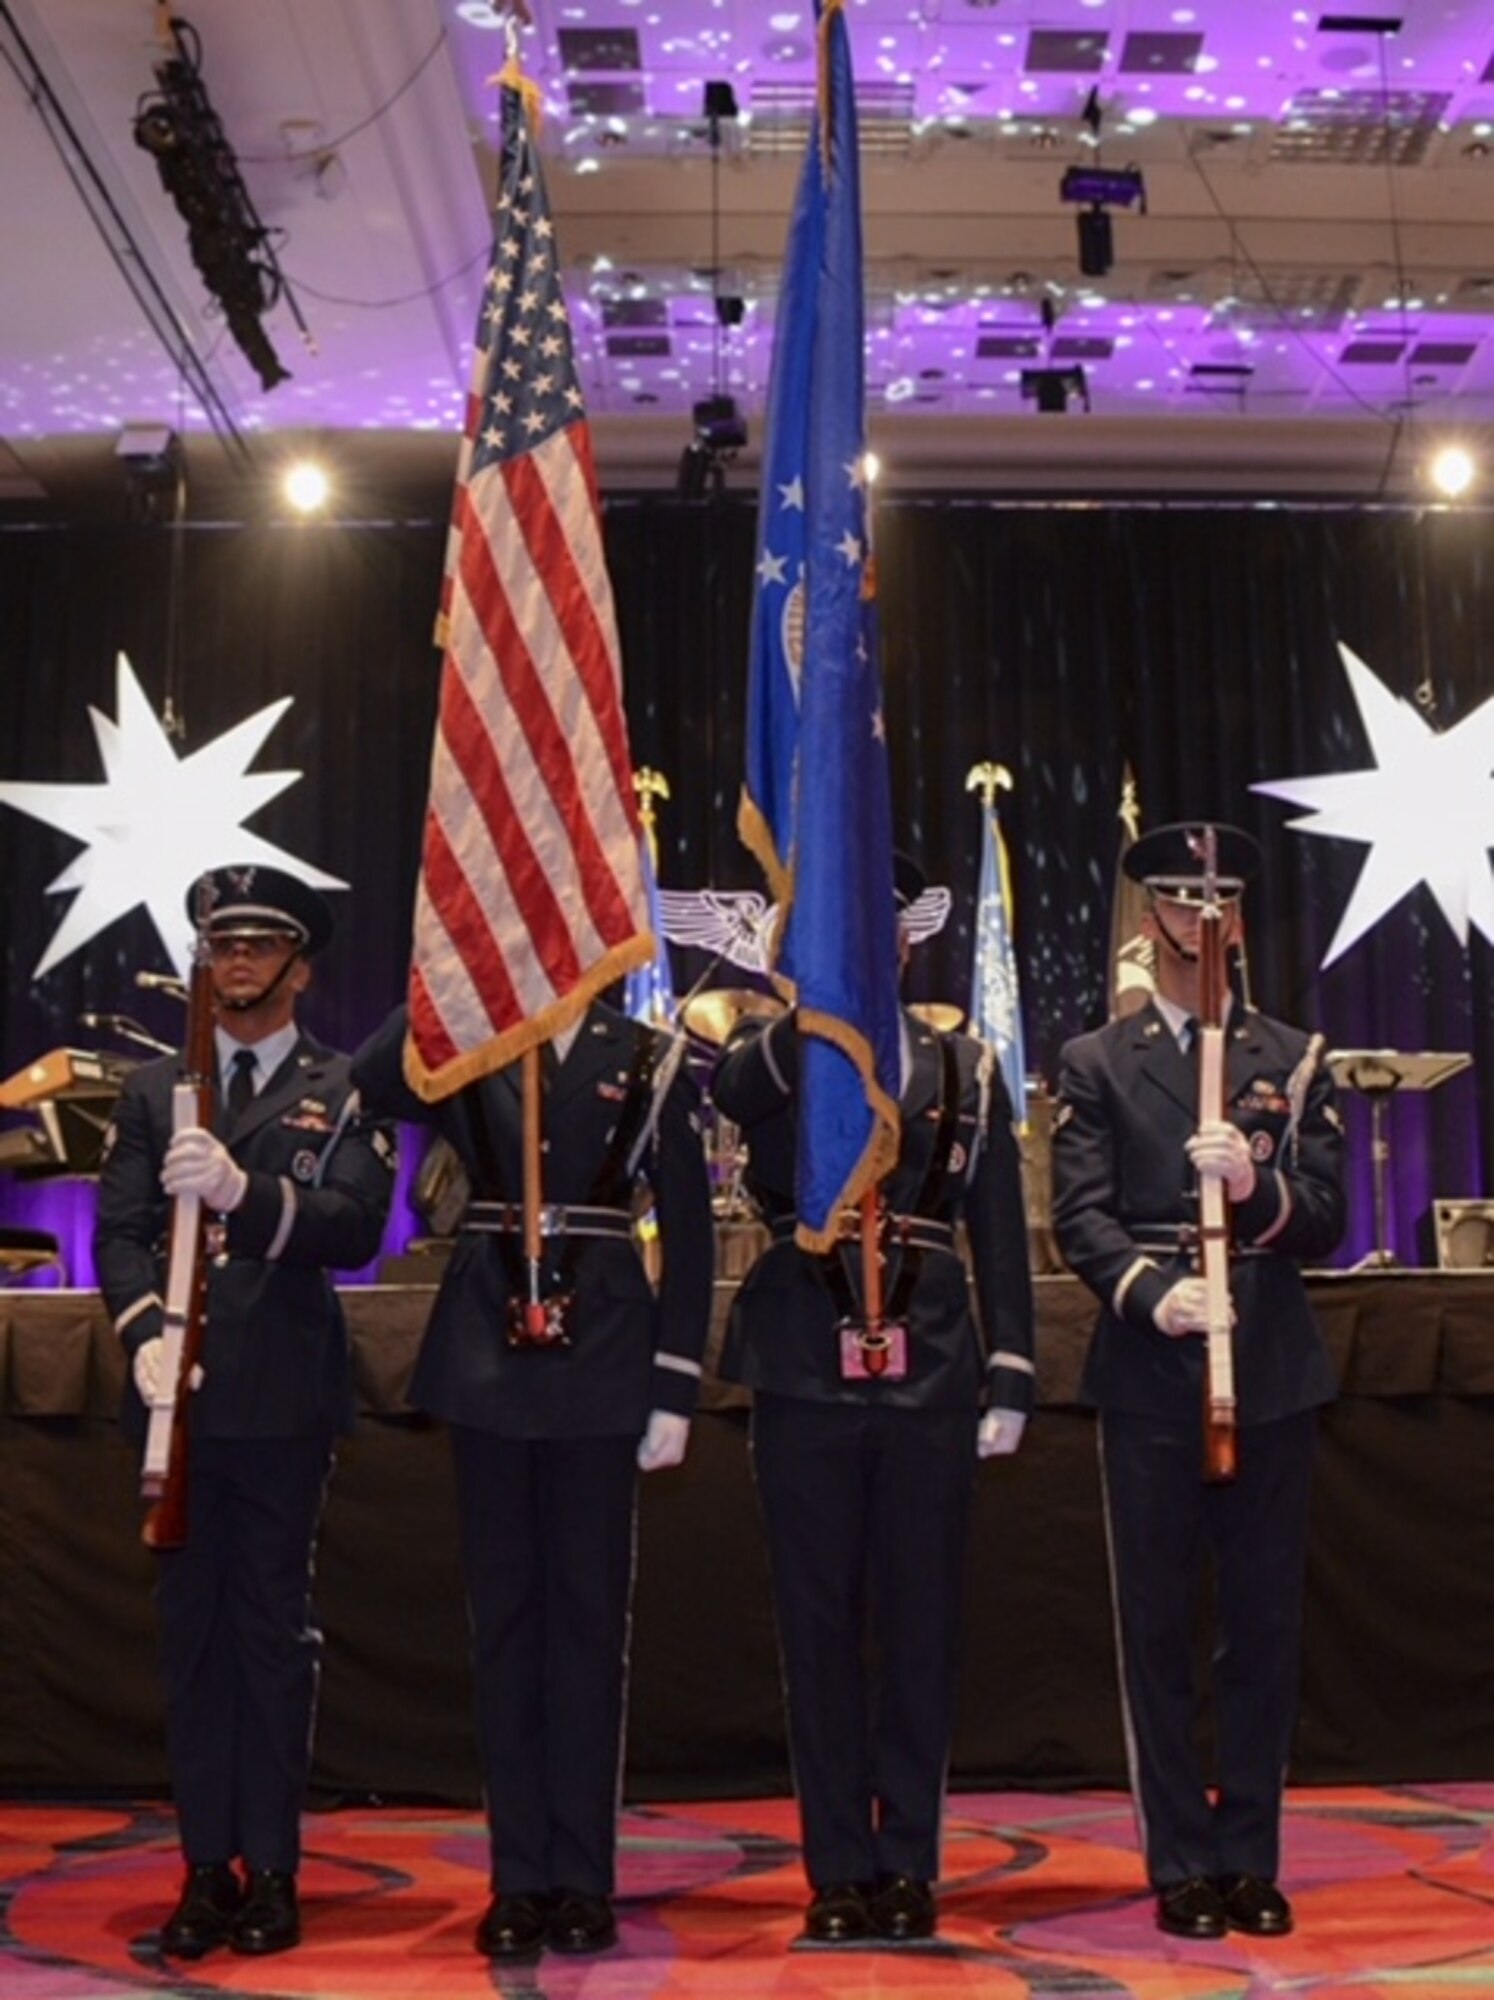 The Honor Guard from Travis Air Force Base, Calif., present the colors at the Air Force Sergeants Association International Convention in Reno,Nevada. This signified the beginning of the Air Force Honors Banquet, which was the final event for the Professional Airmen's Conference. (U.S. Air Force photo by Senior Airman Amber Carter)